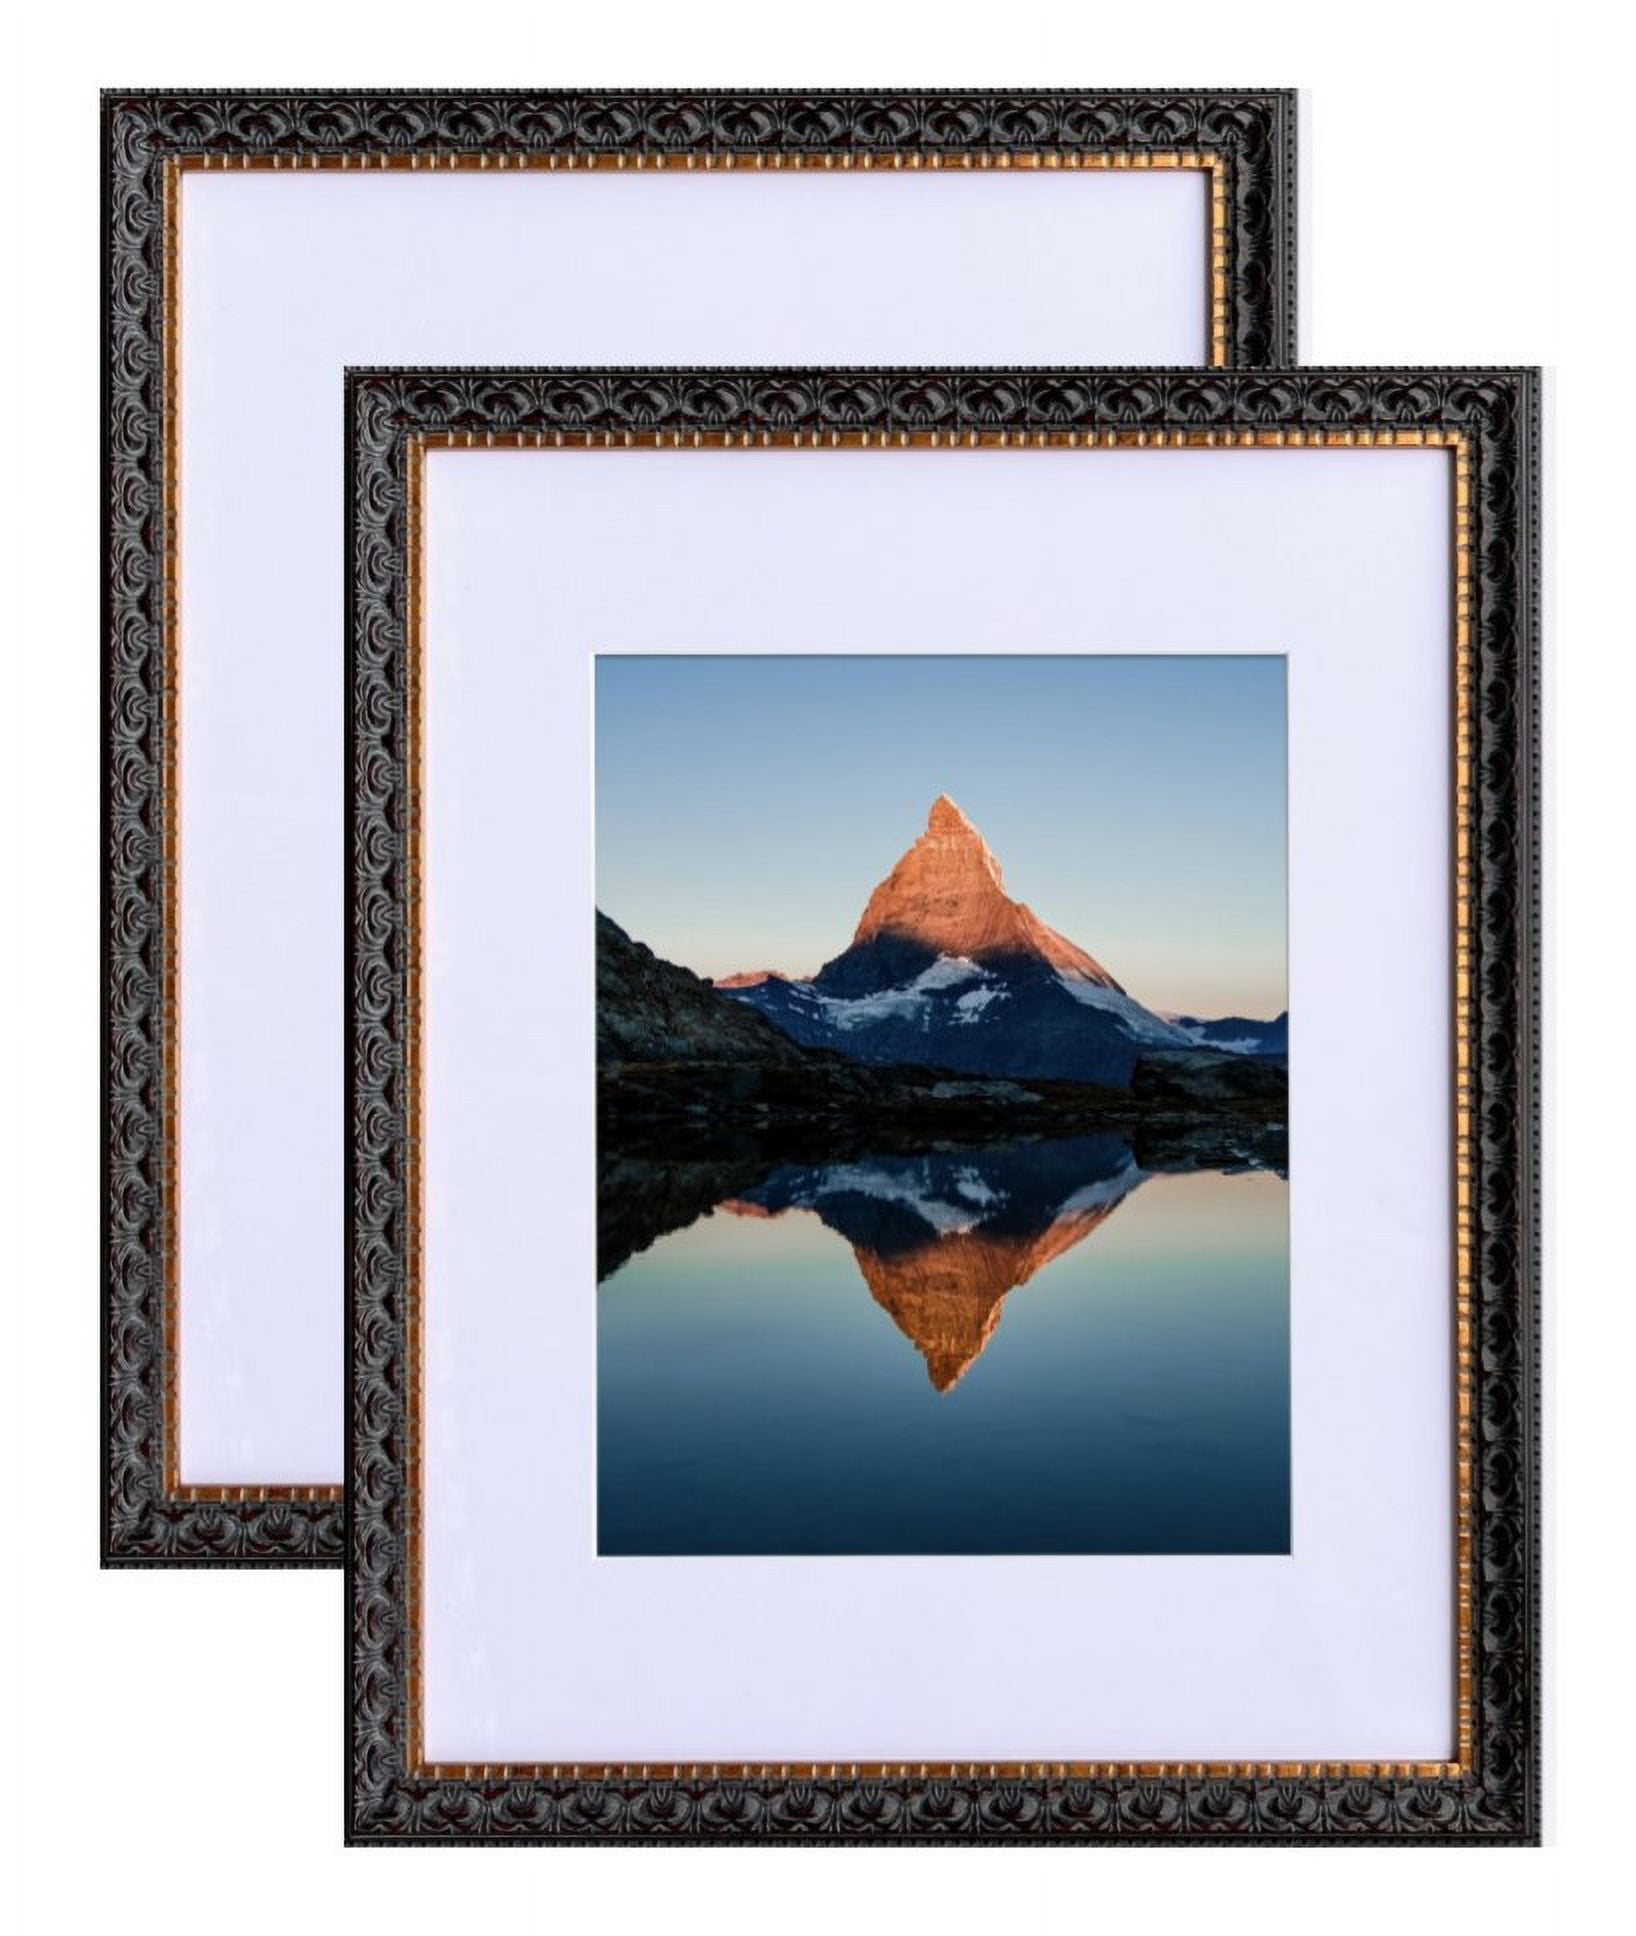 A PLUS MAX 16x20 frame. Black Solid Wood Picture Frame 16x20 with Tempered  glass for Photo size 11x14, or 16x20 Poster Frame horizontal/vertical